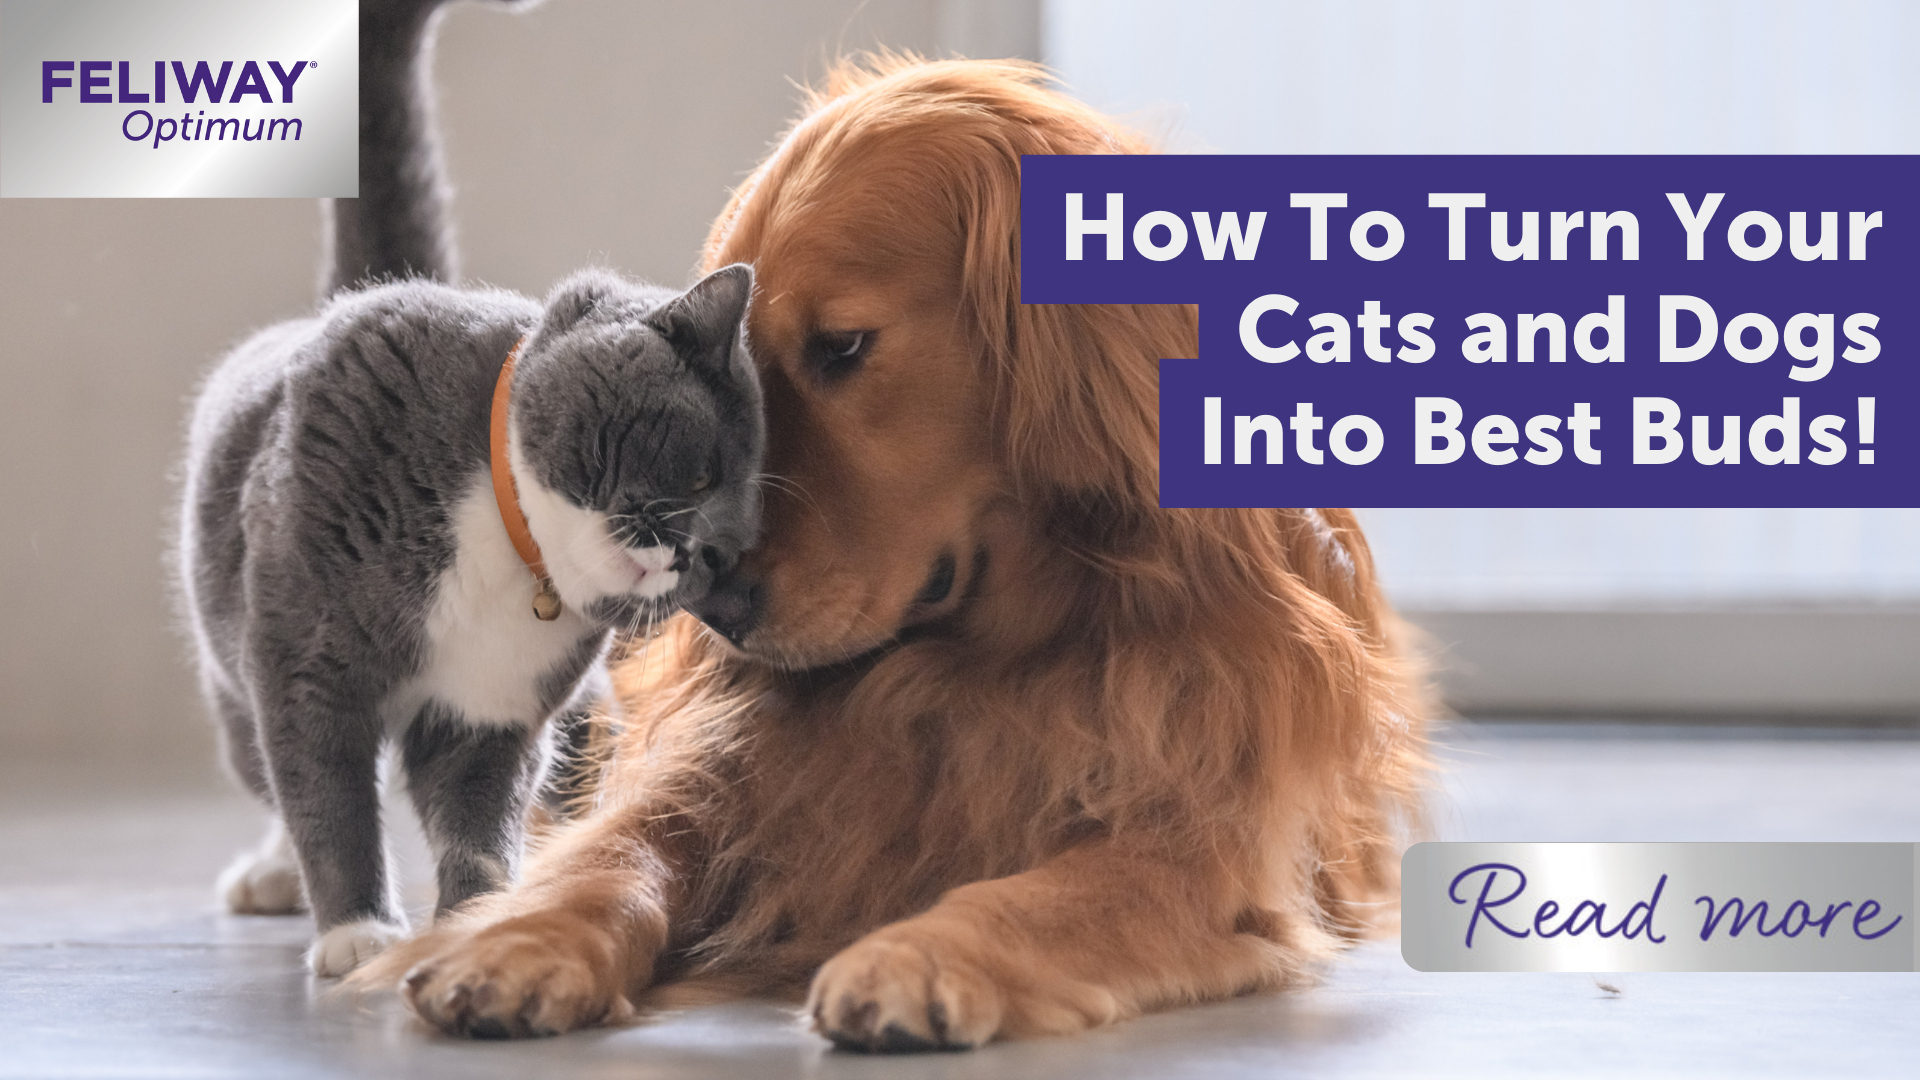 How to turn your cats and dogs into best buds!